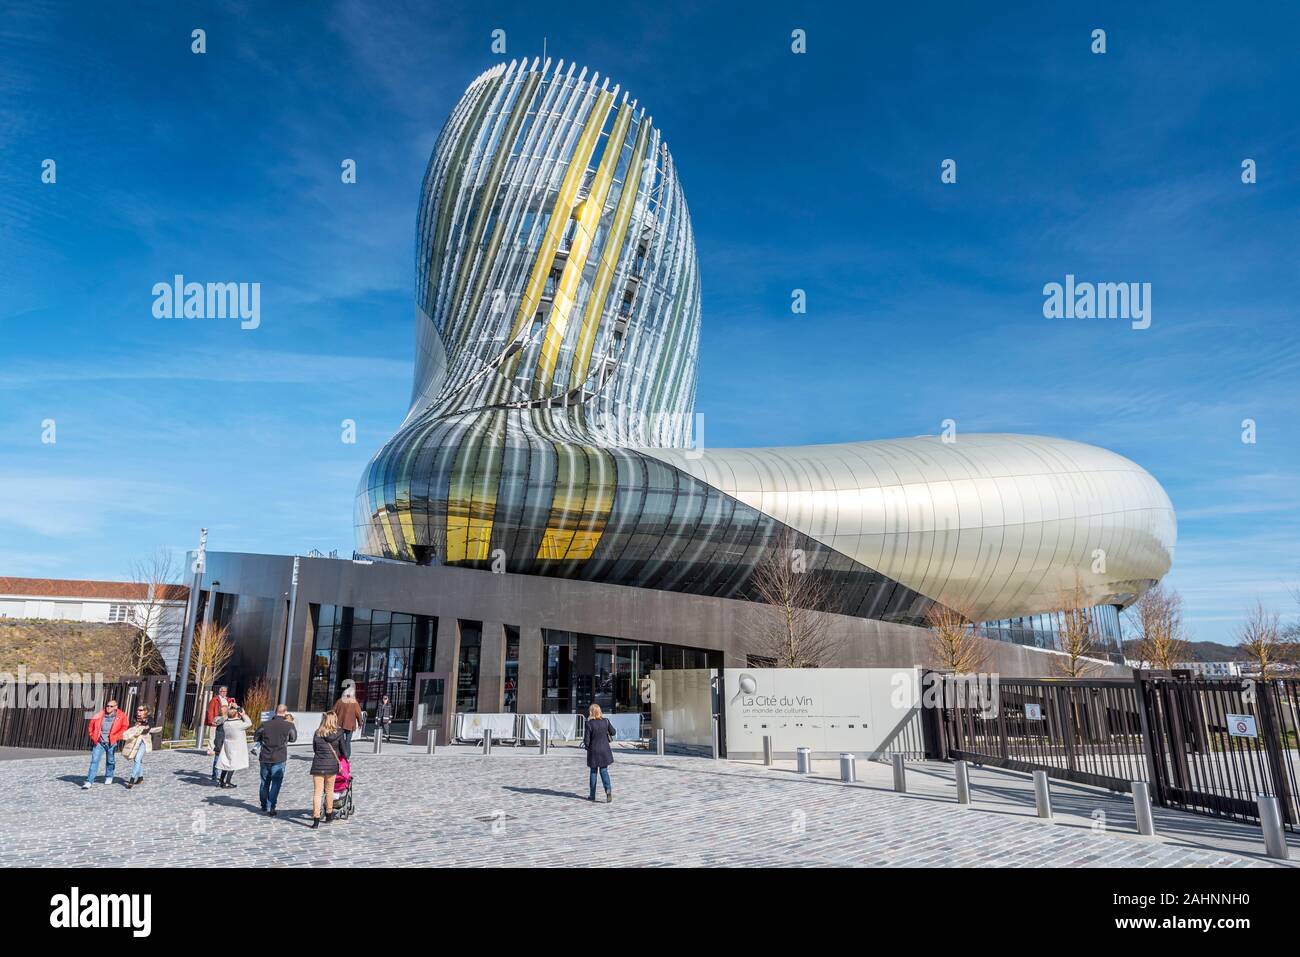 Bordeaux, France – February 25, 2017  The Cite du Vin in Bordeaux, the museum and exhibition place on the theme of wine in Bordeaux. Stock Photo